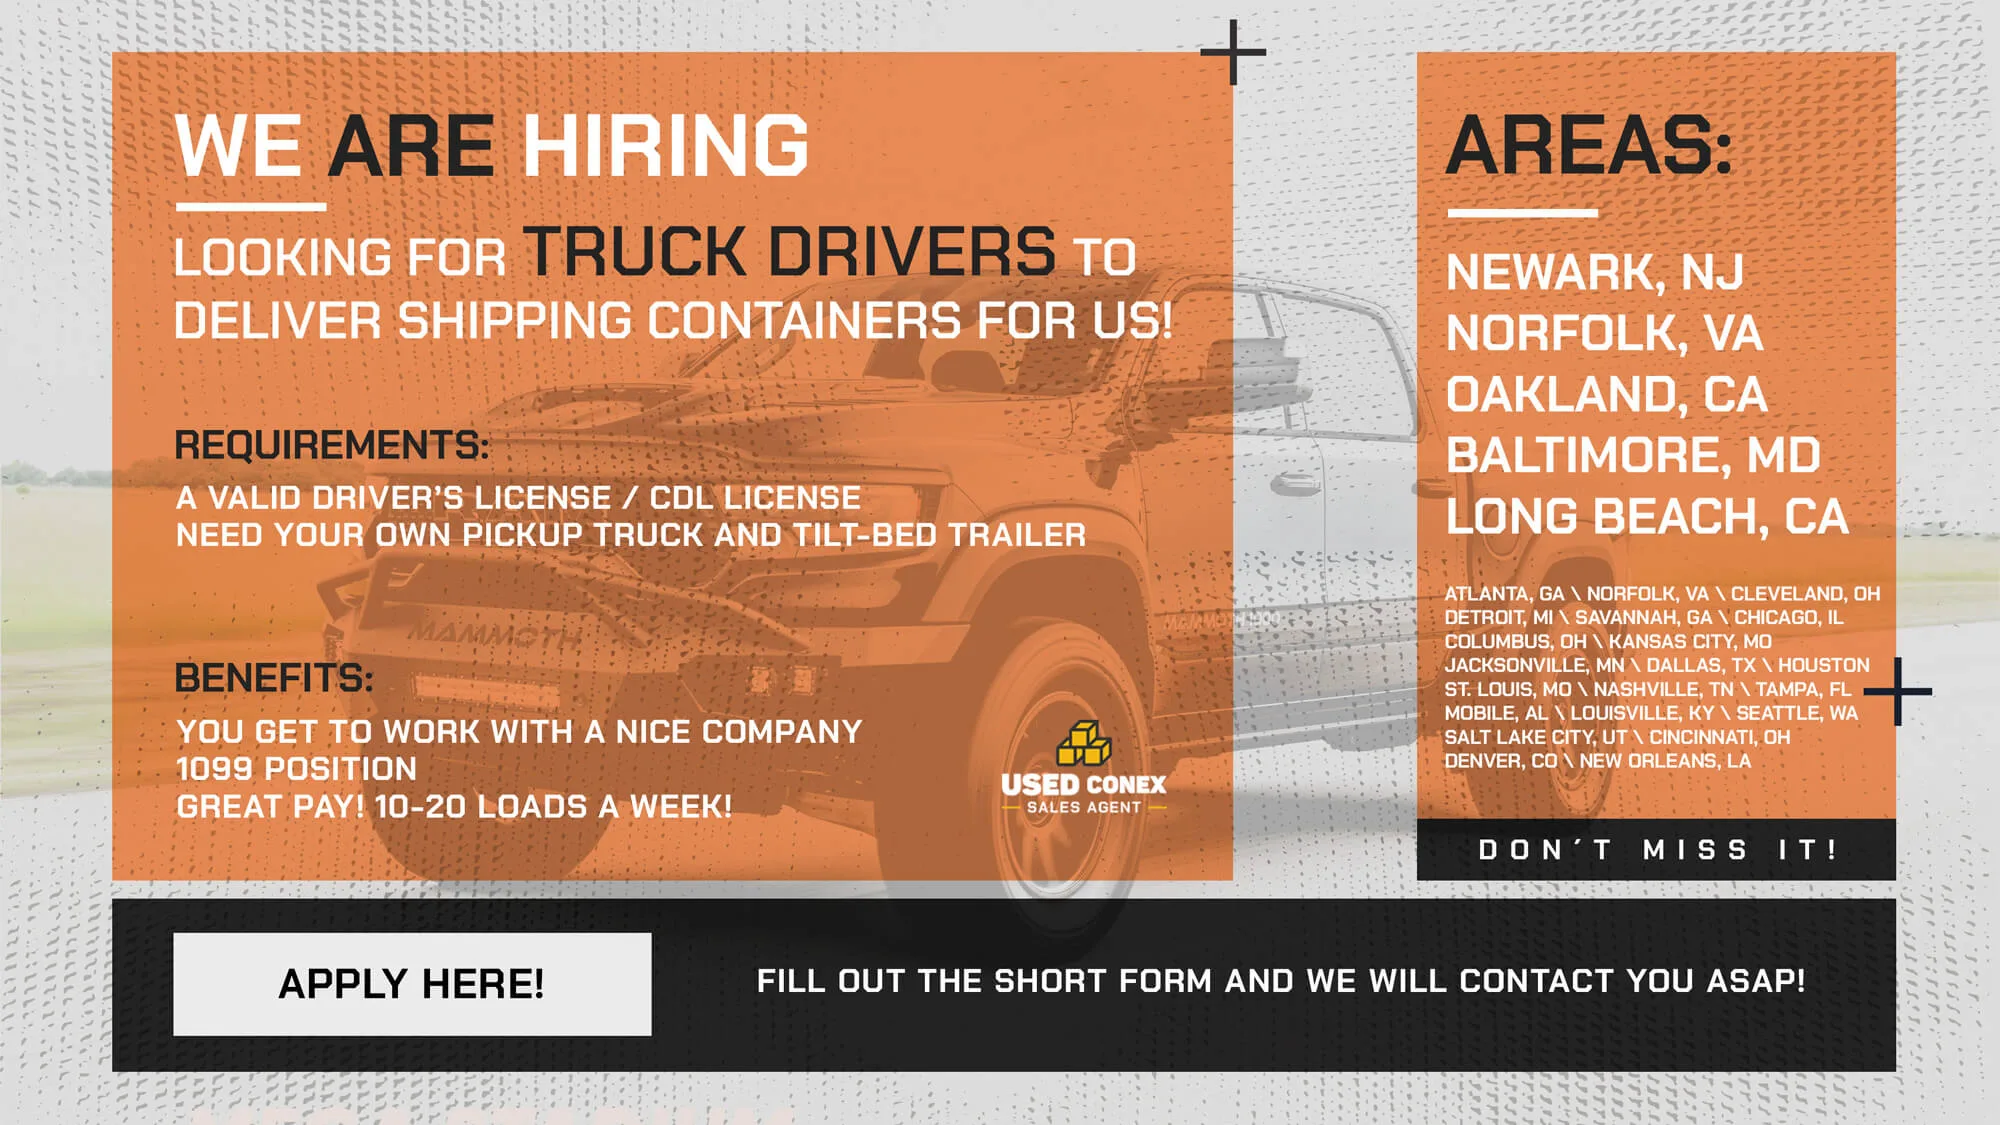 Looking for truck drivers to deliver shipping containers for us